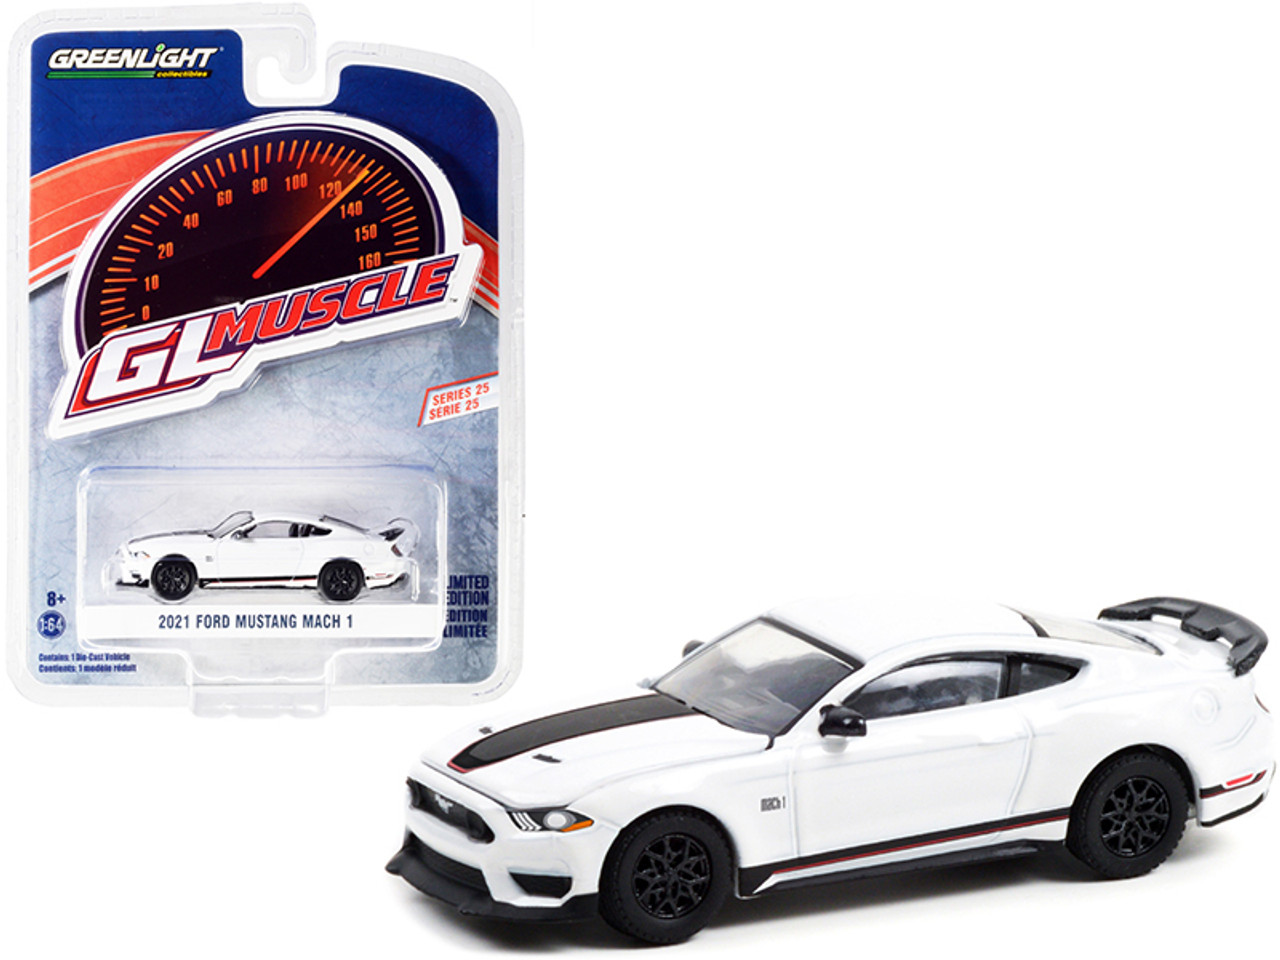 2021 Ford Mustang Mach 1 Oxford White with Black Stripes "Greenlight Muscle" Series 25 1/64 Diecast Model Car by Greenlight